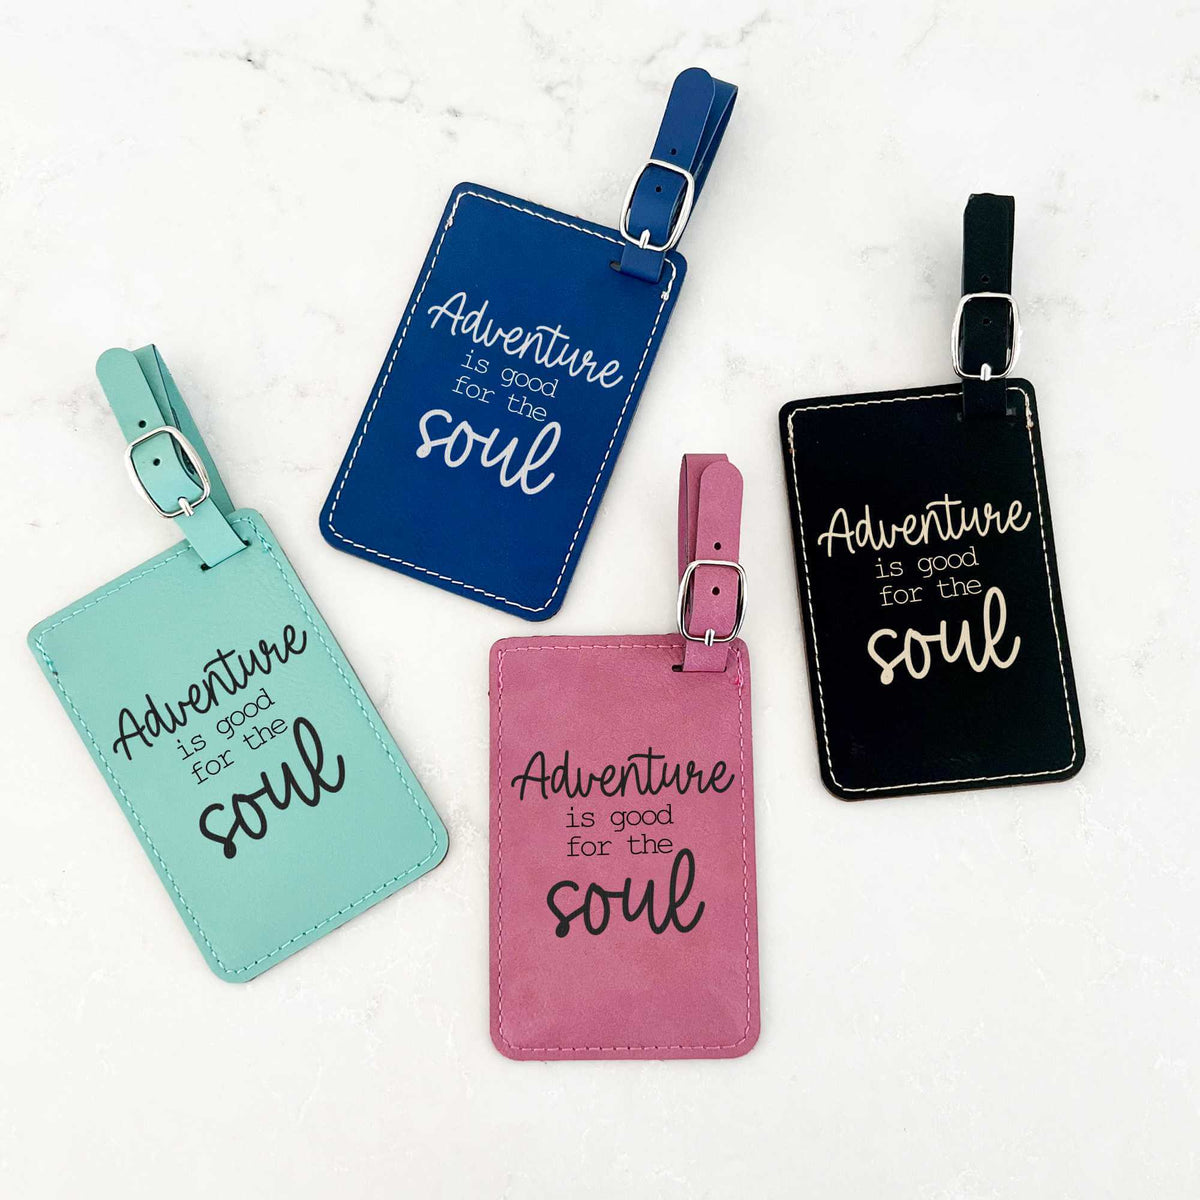 Adventure is Good for the Soul - Luggage Tag